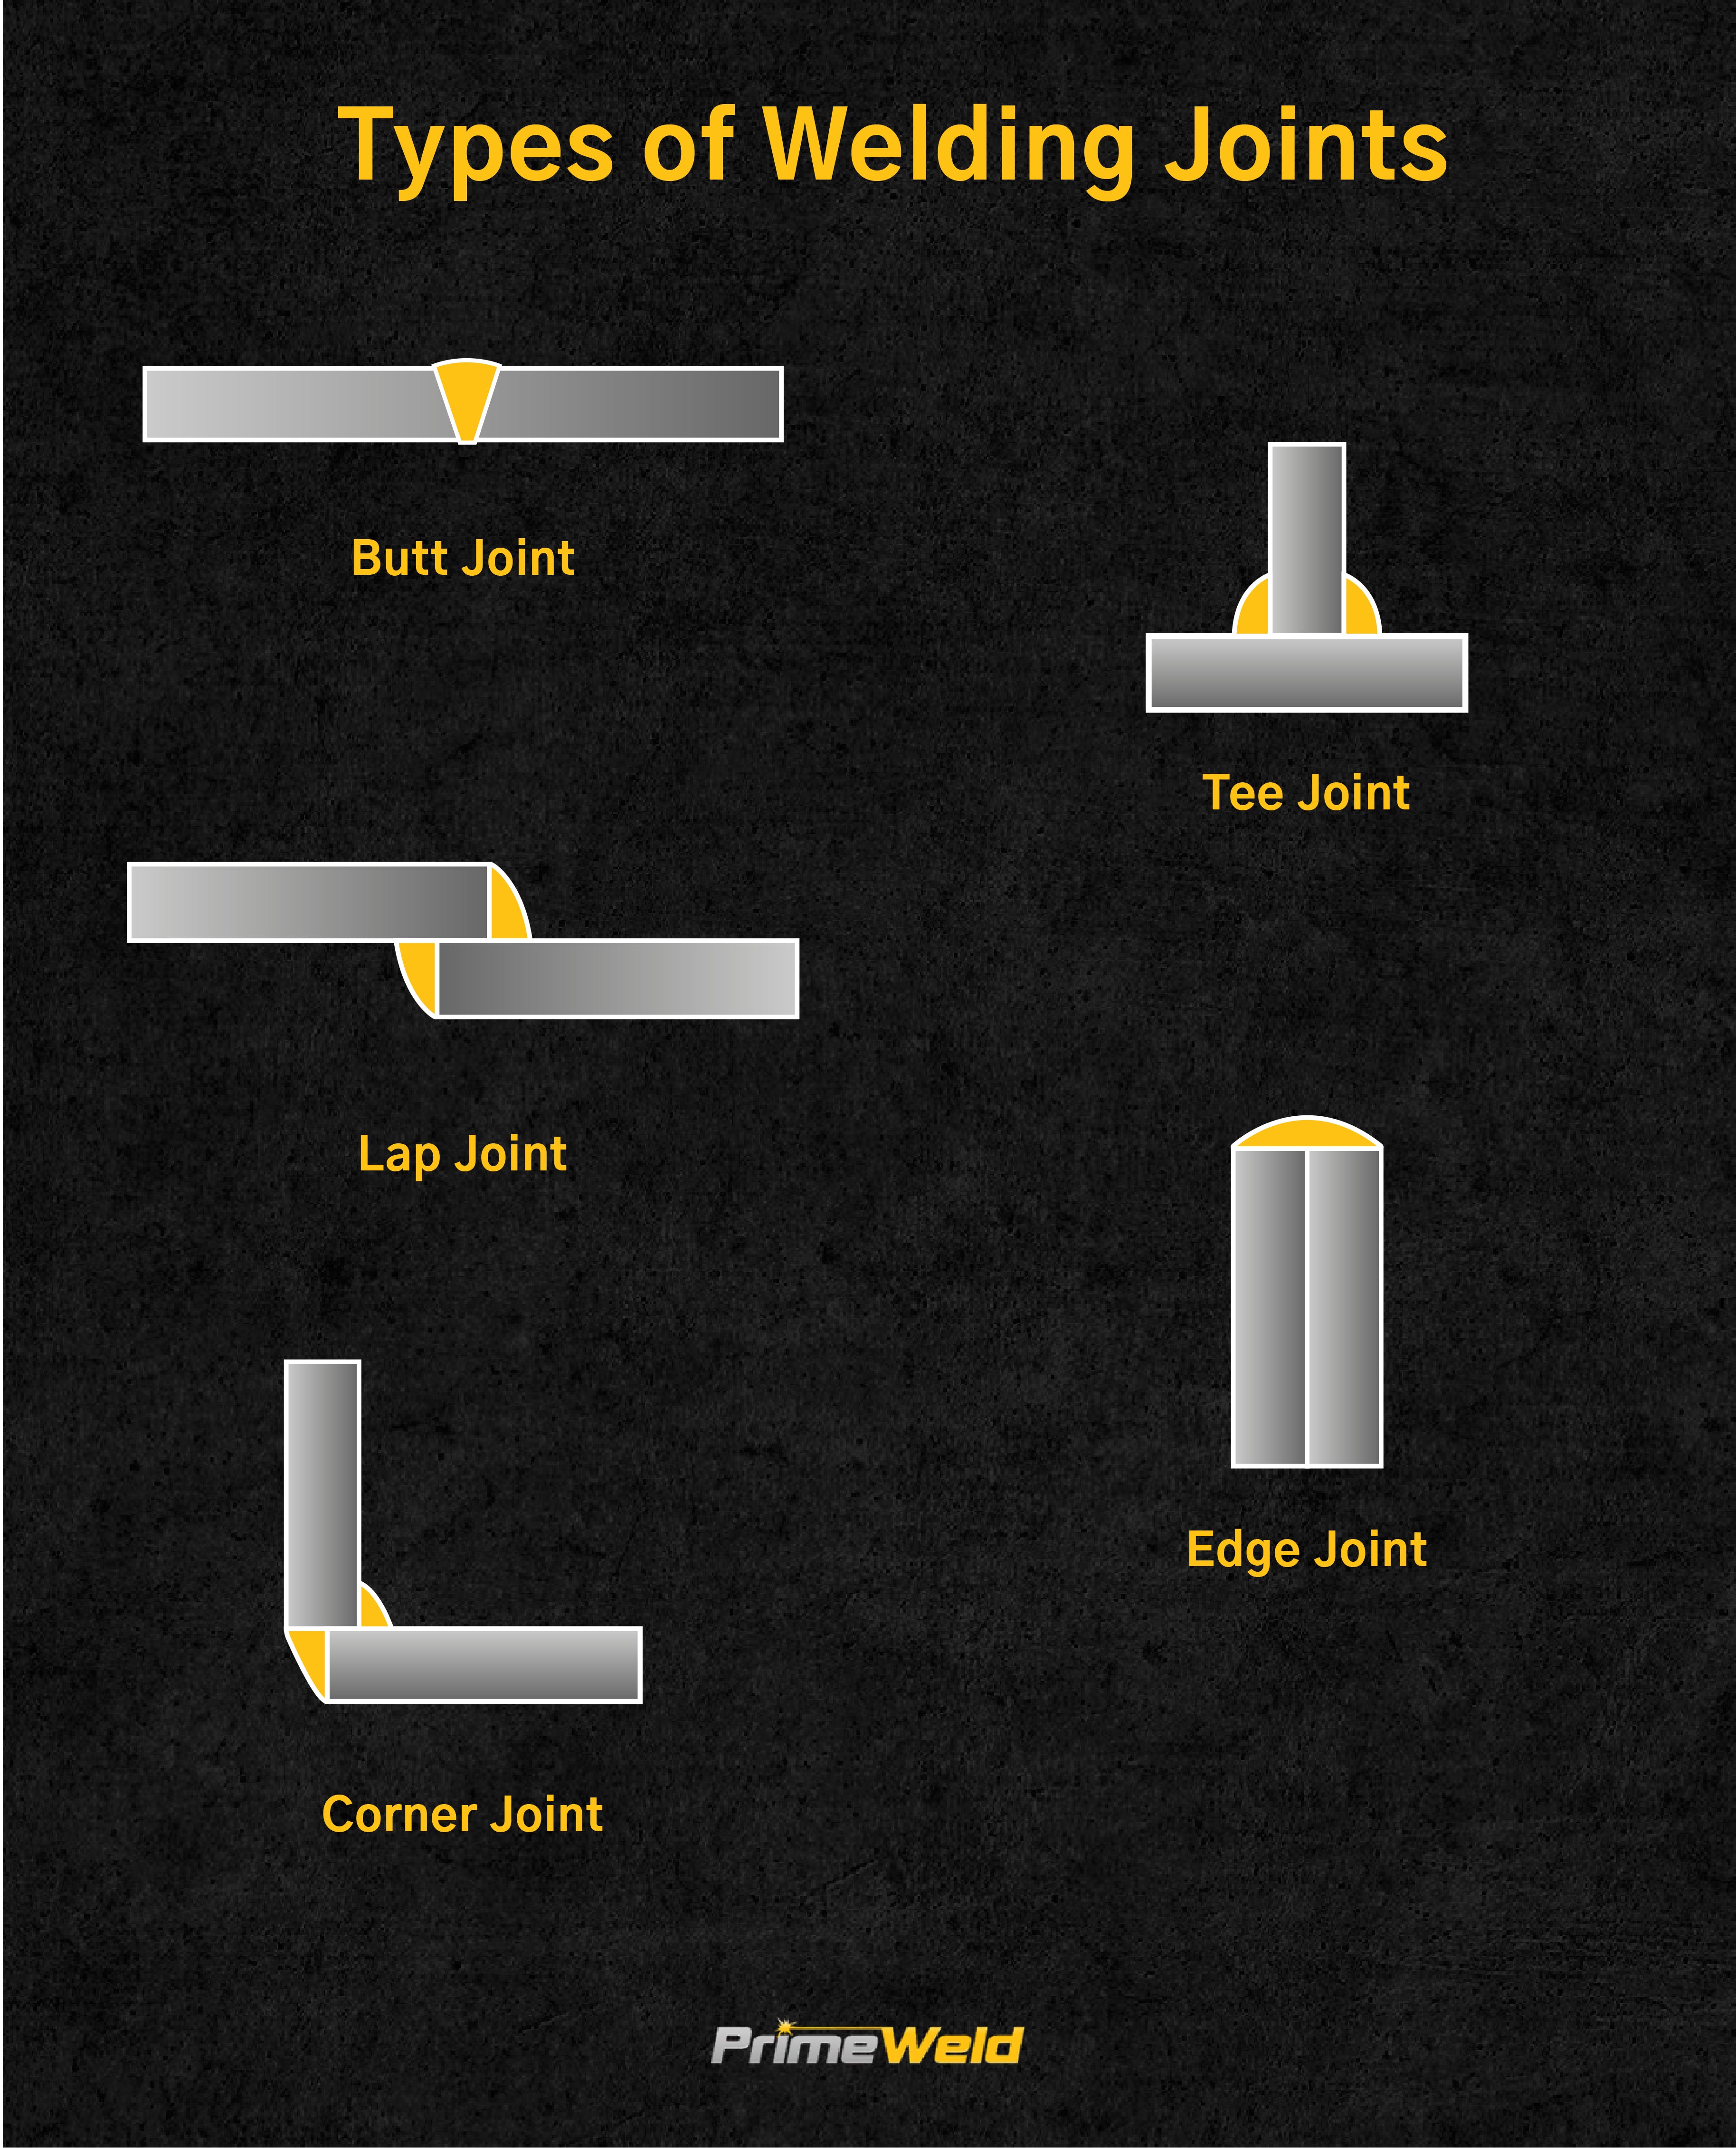 Welding joints image